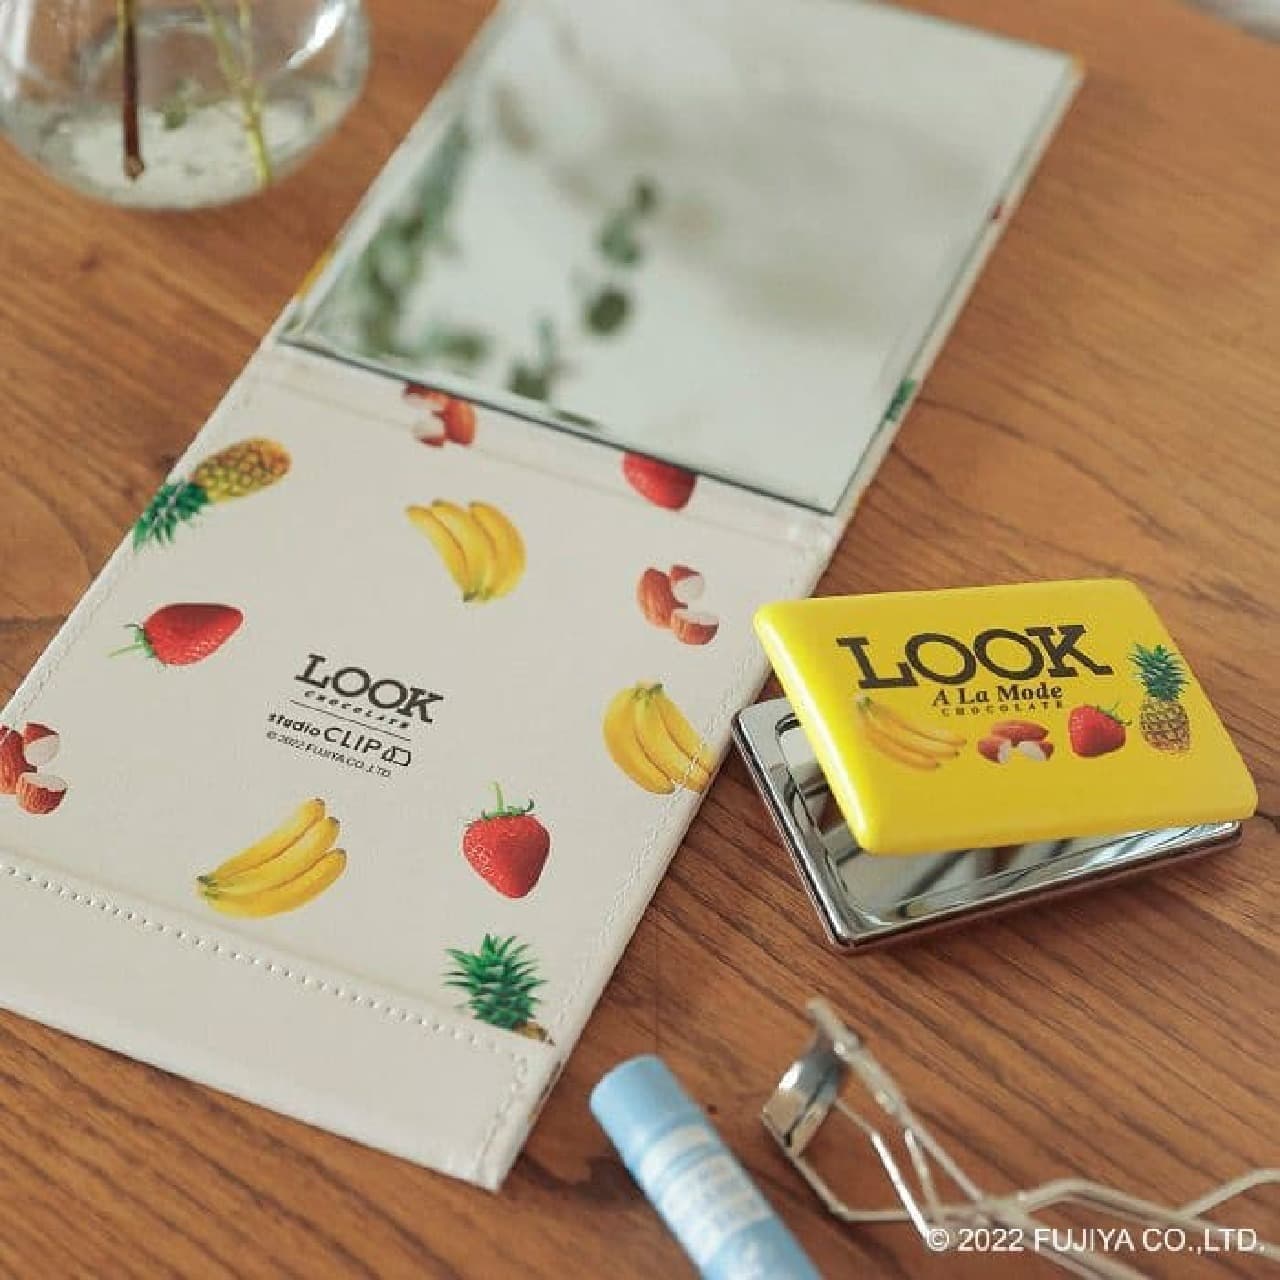 Collaboration products with Stadio Clip "Look (a la mode)